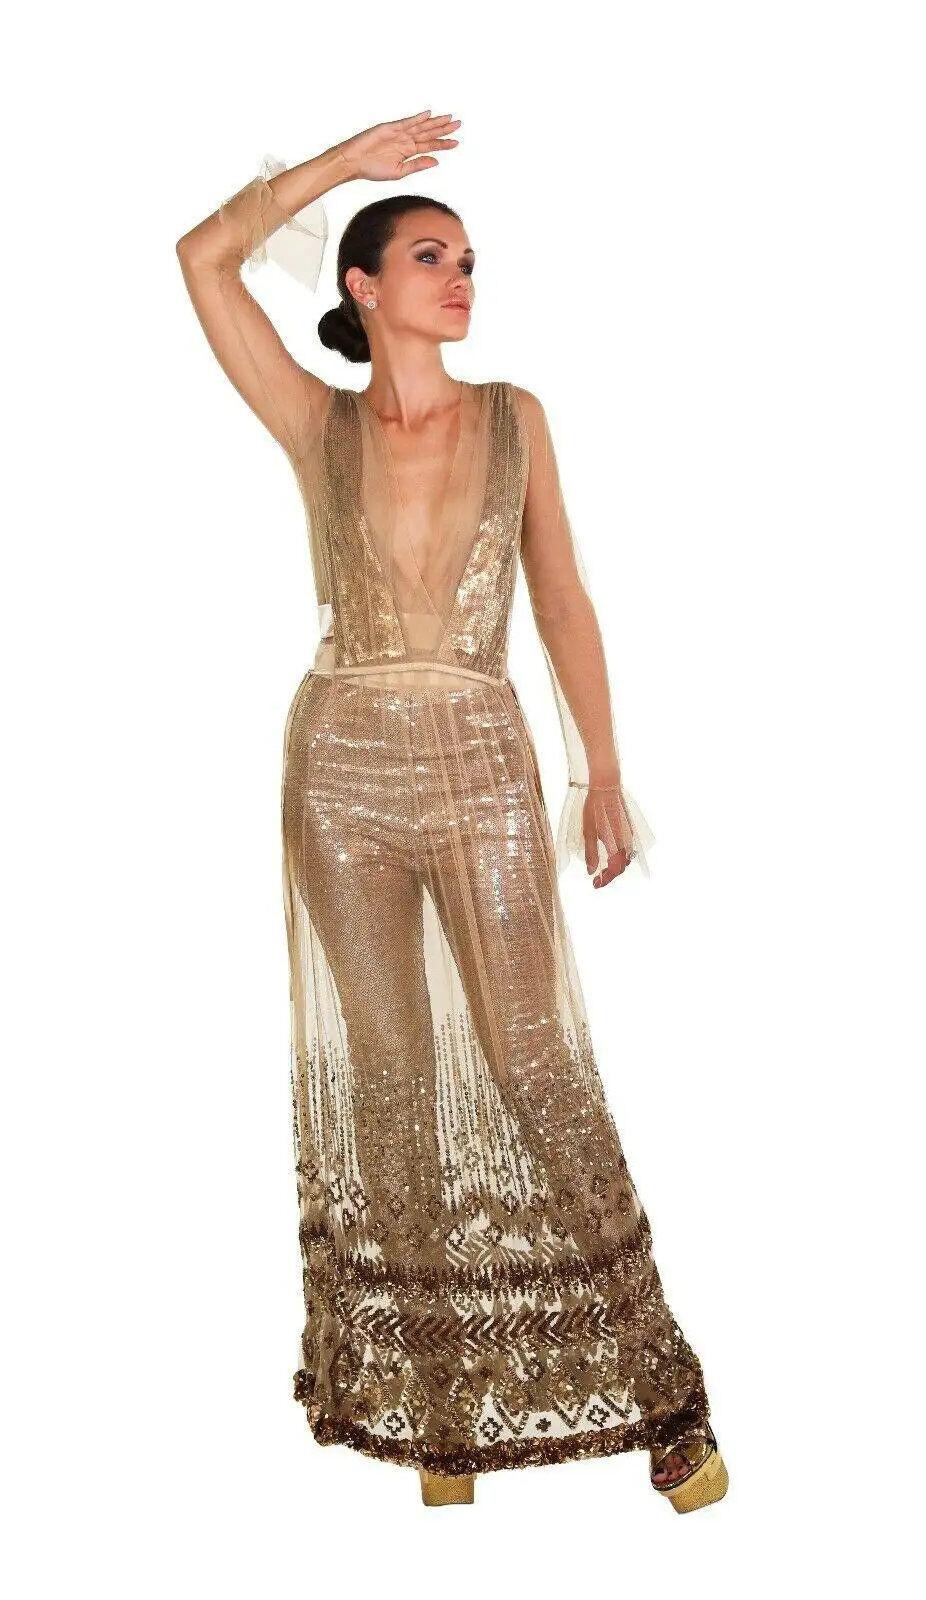 New Tom Ford Nude Embellished Chiffon Dress w/ Gold Sequin Pants 38 - 2 For Sale 4